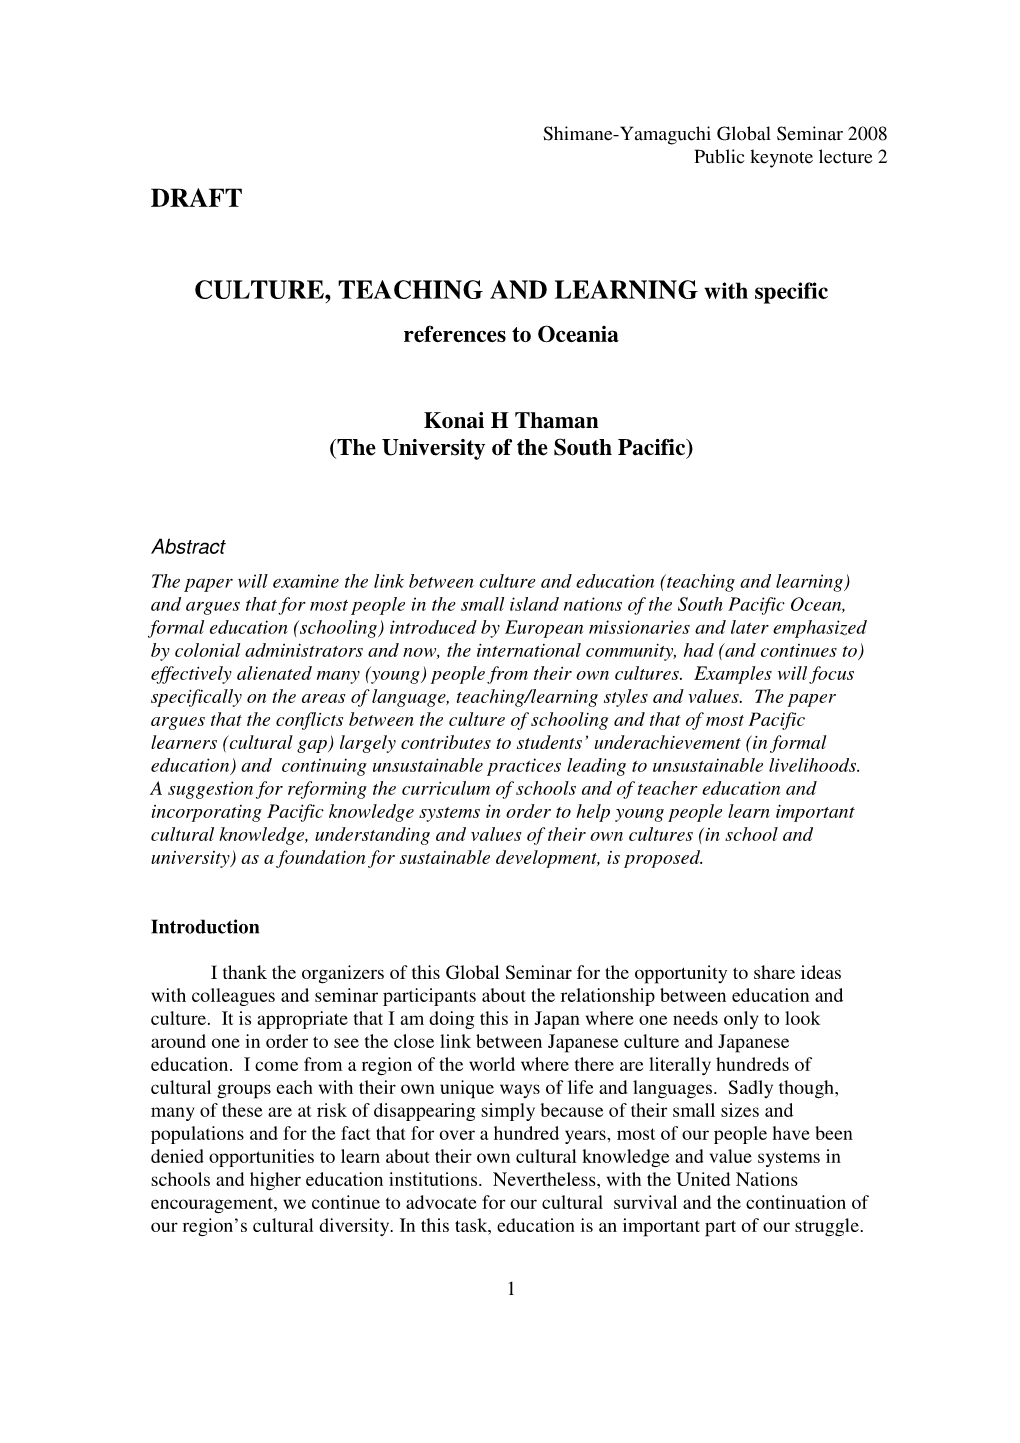 DRAFT CULTURE, TEACHING and LEARNING with Specific